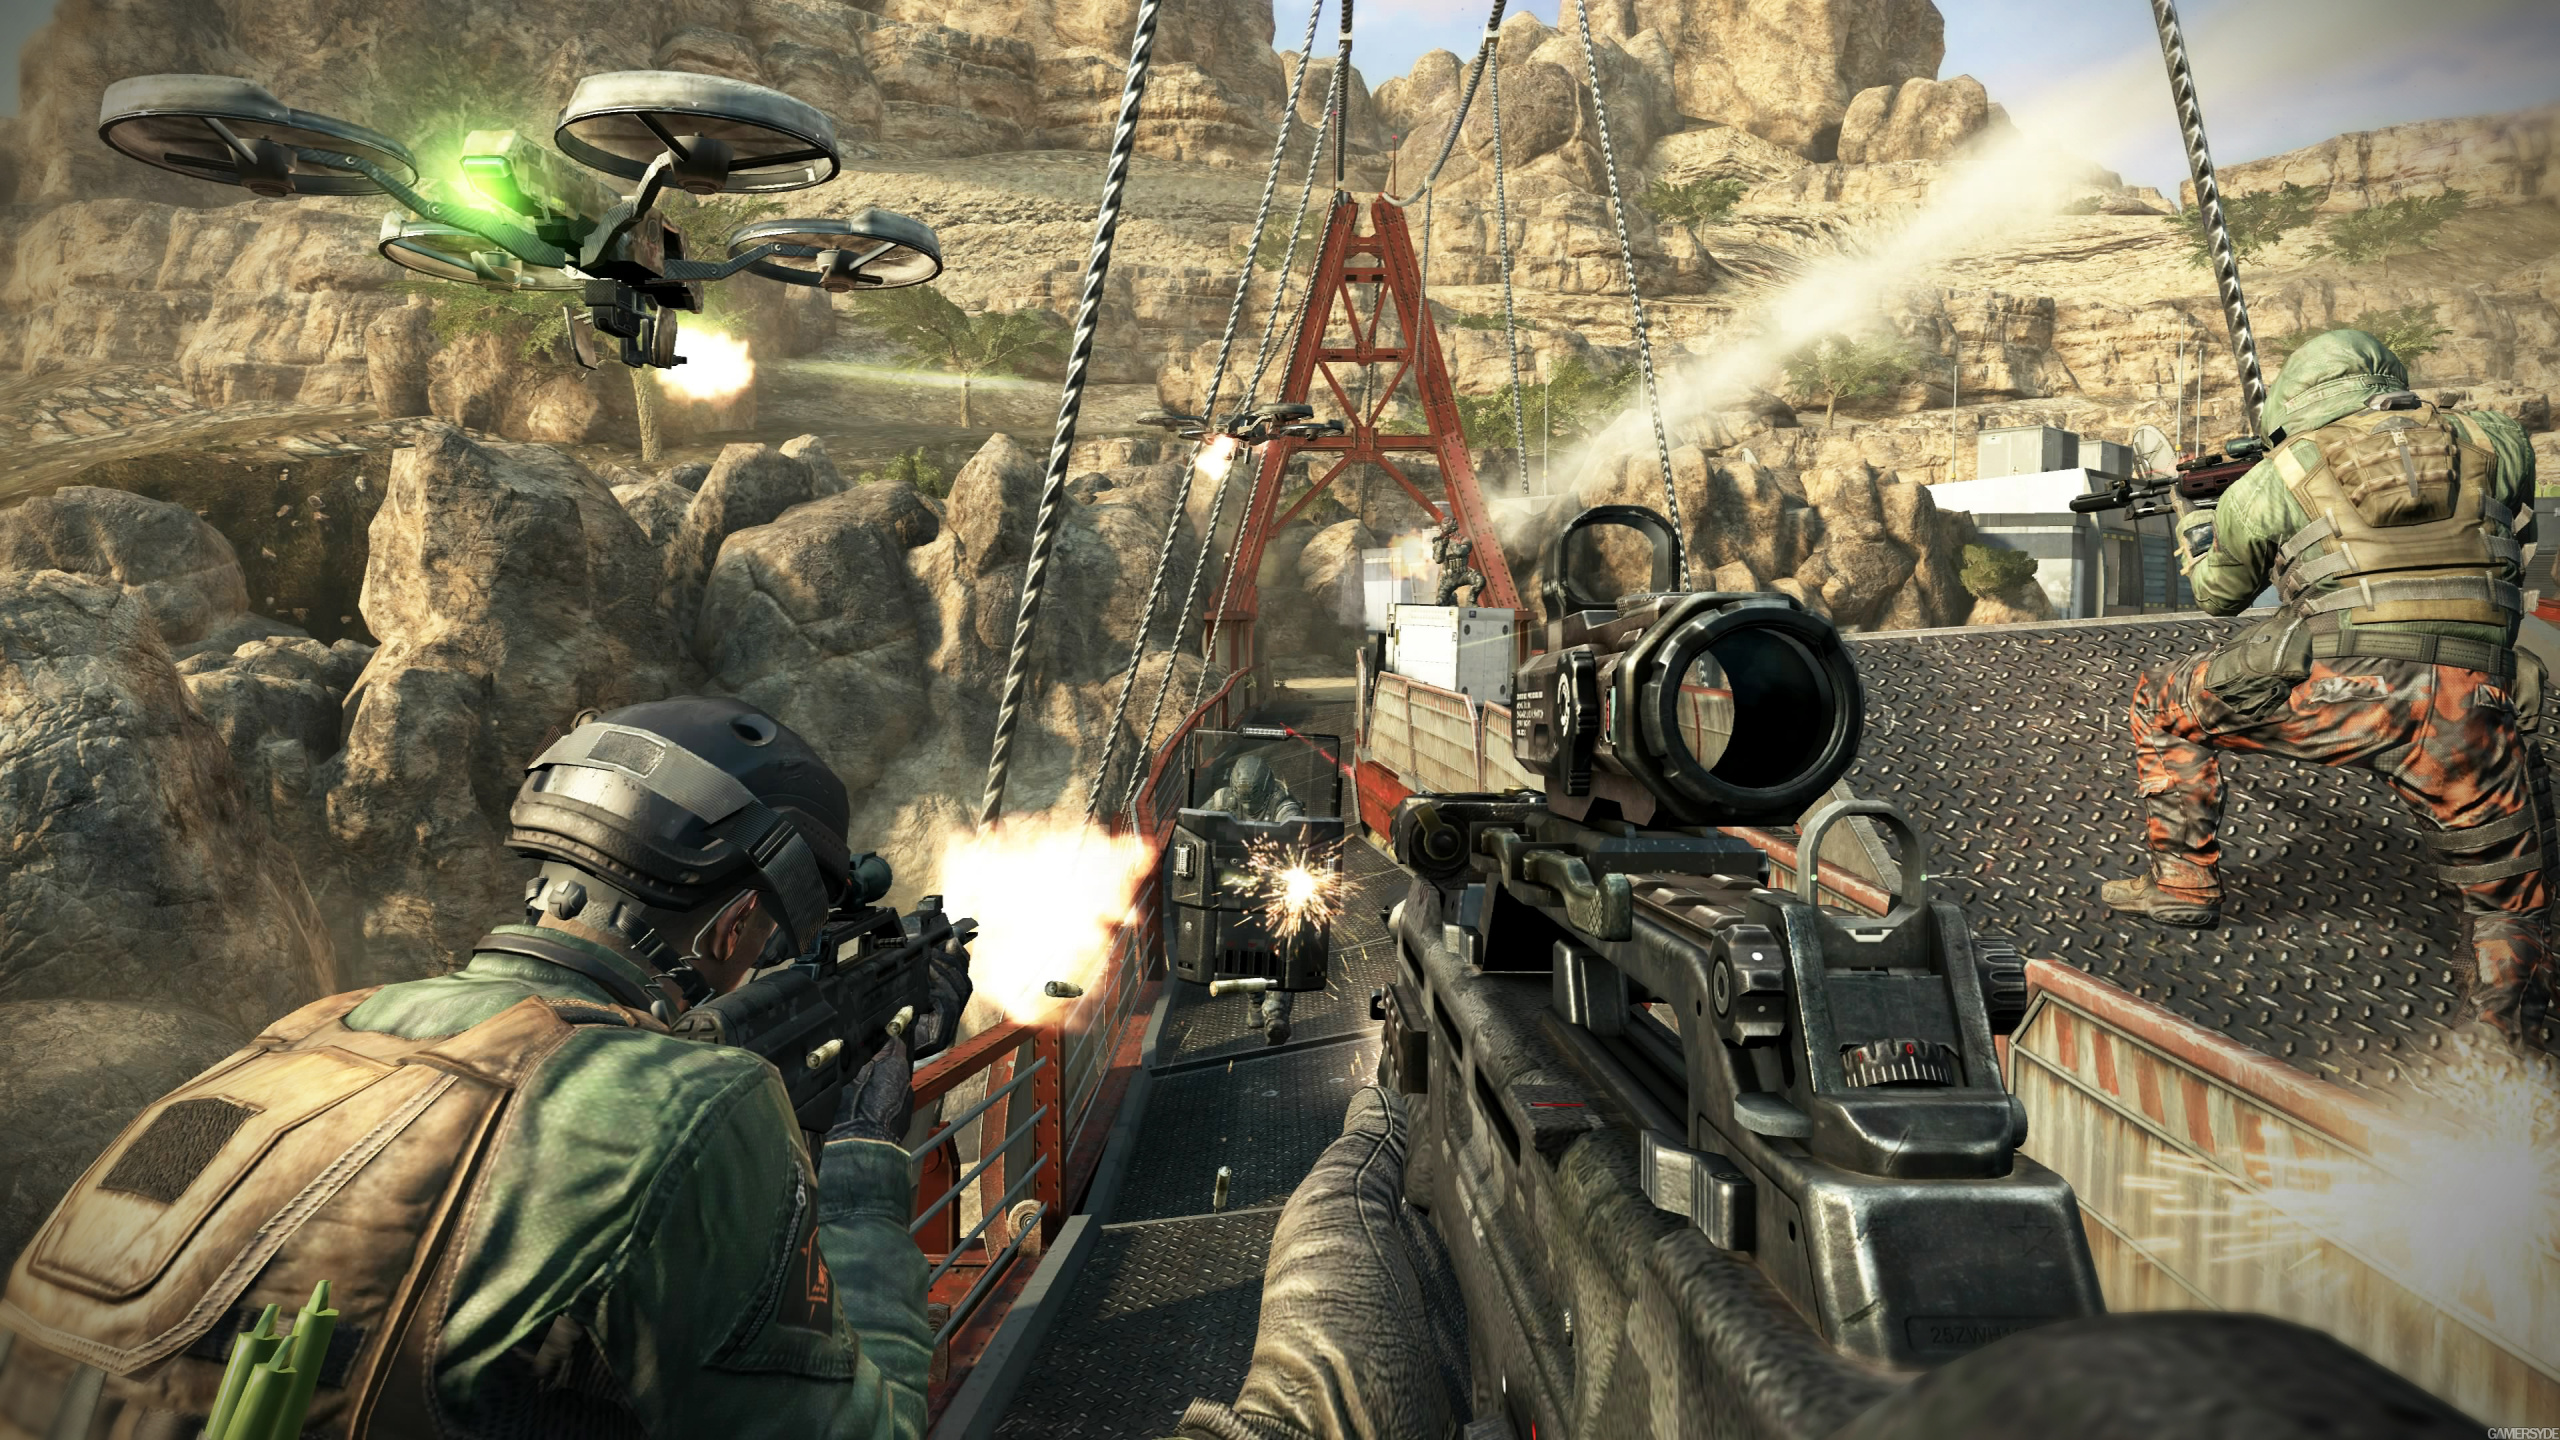 Call of Duty Black Ops Ii, Call of Duty Black Ops, Xbox 360, Treyarch, Multiplayer Video Game. Wallpaper in 2560x1440 Resolution